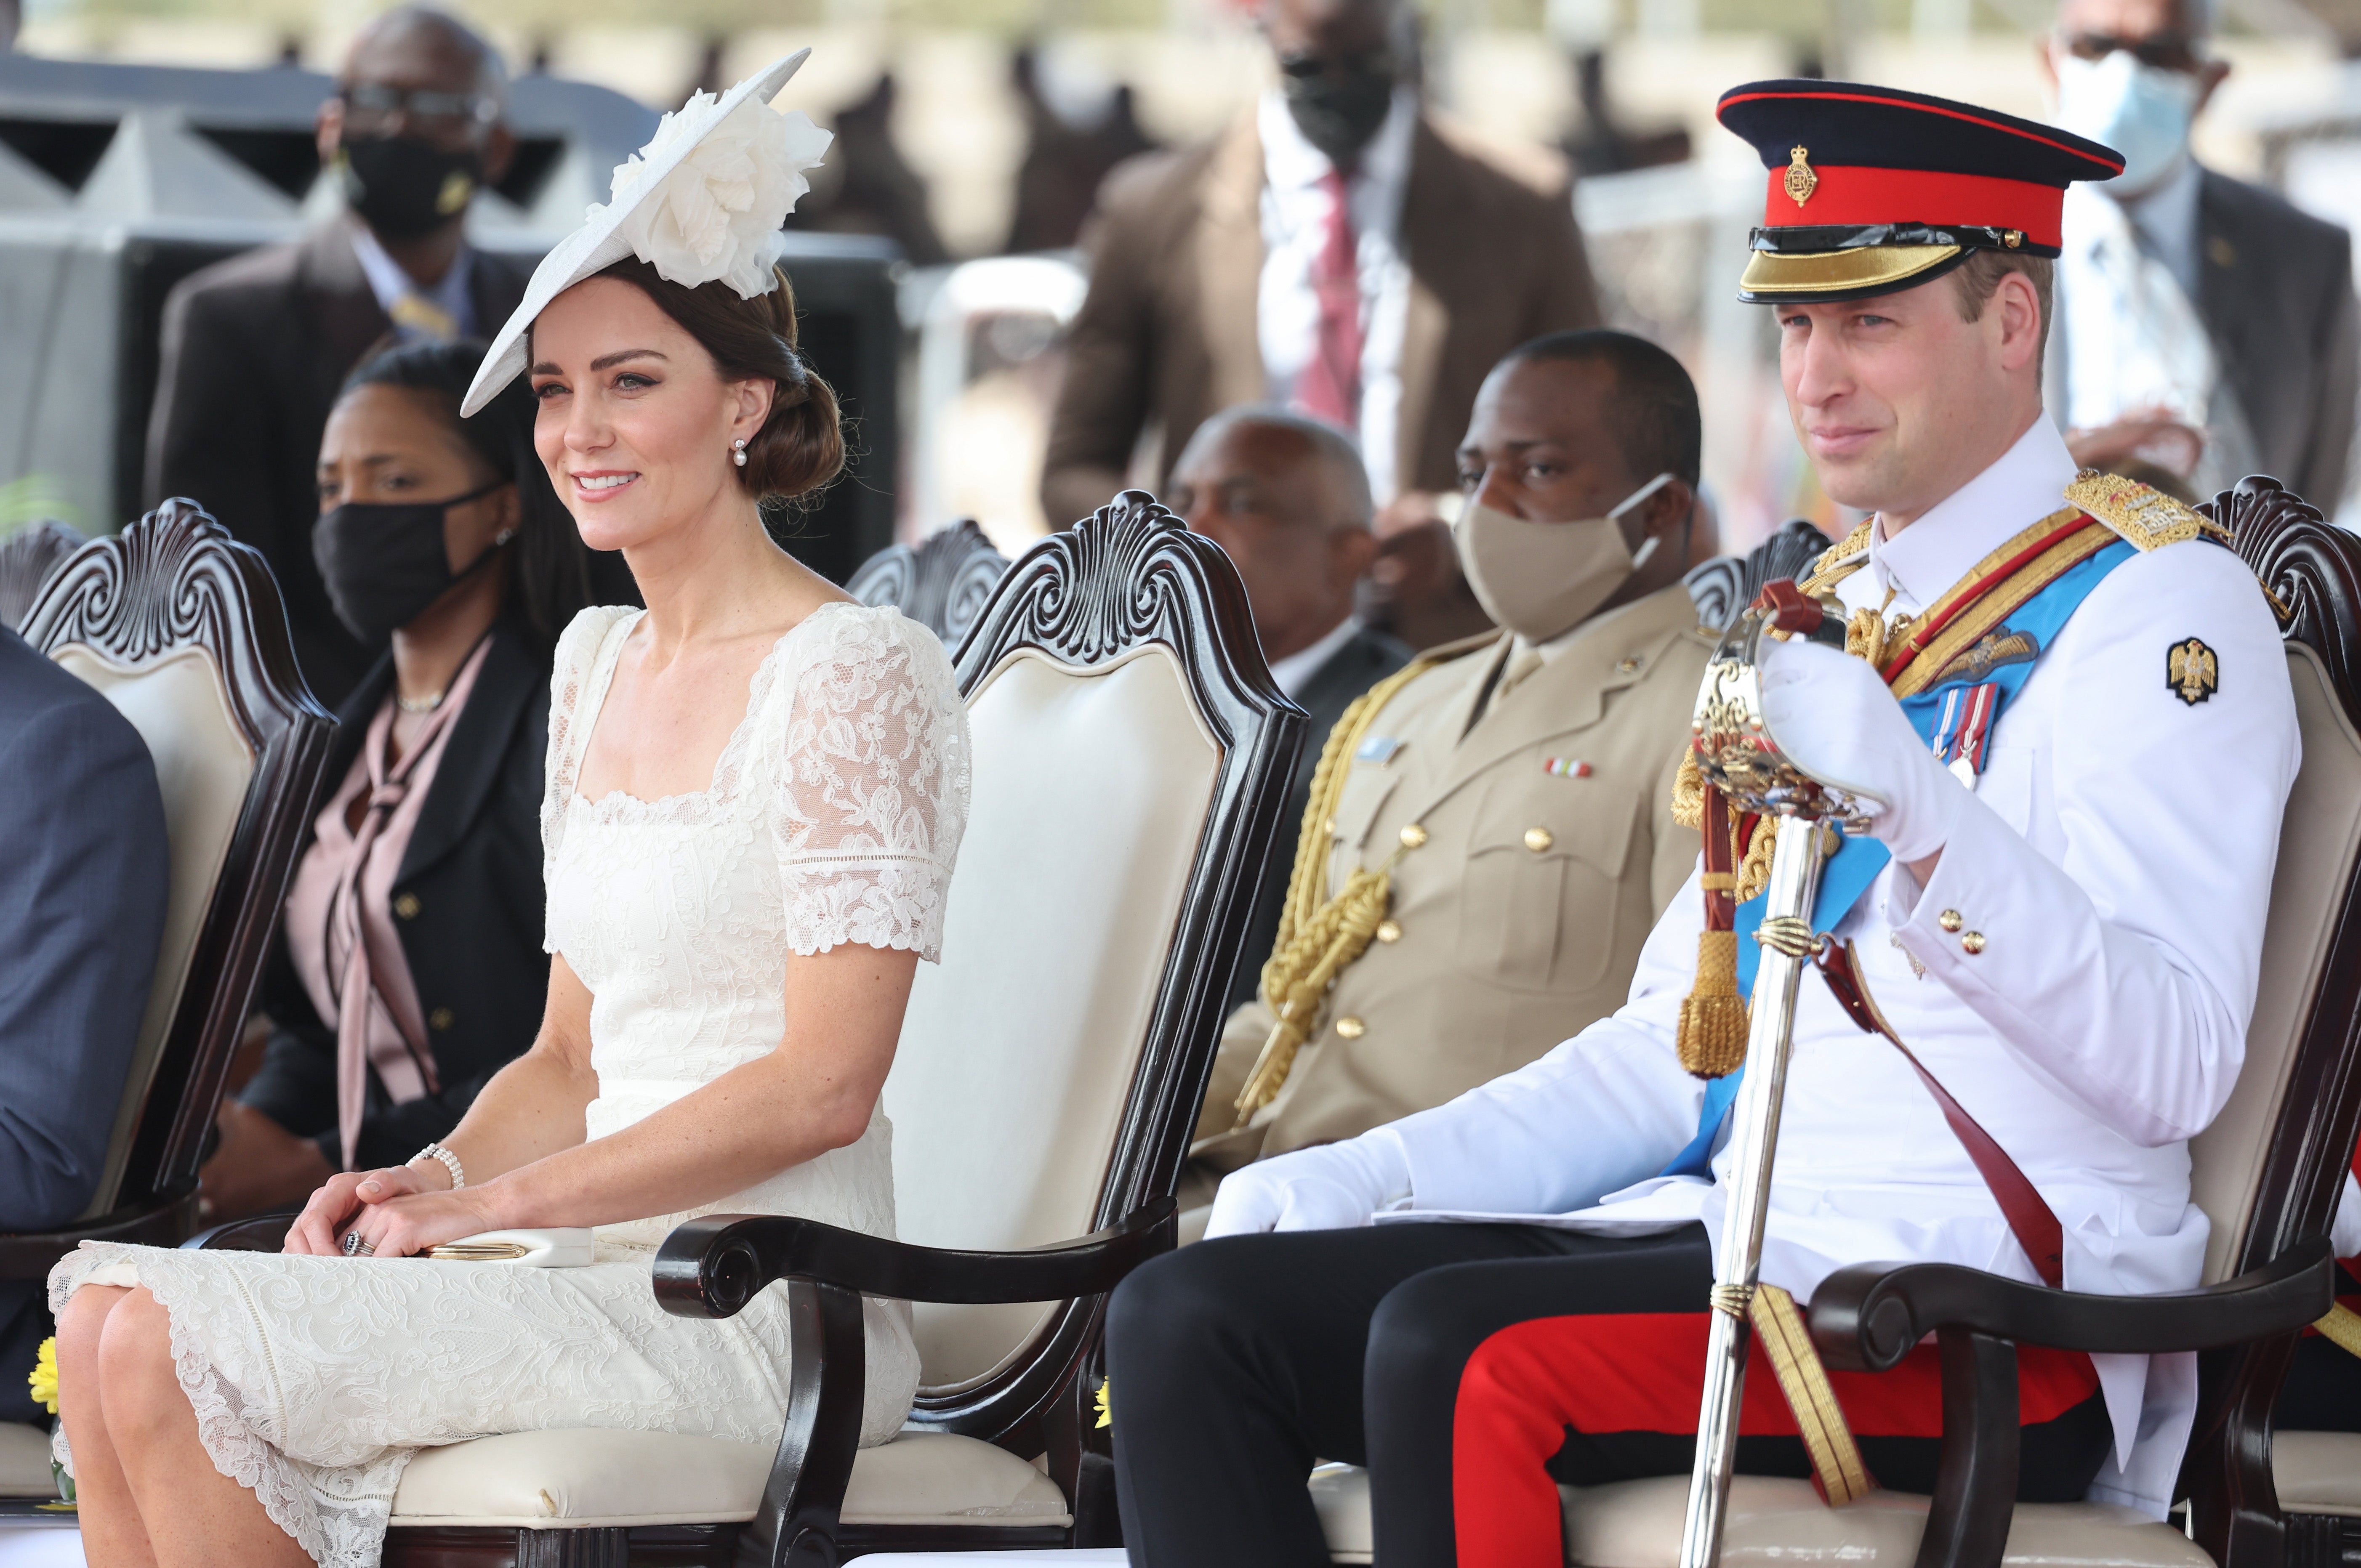 The Duke and Duchess attend the inaugural Commissioning Parade for service personnel in Kingston on 24 March